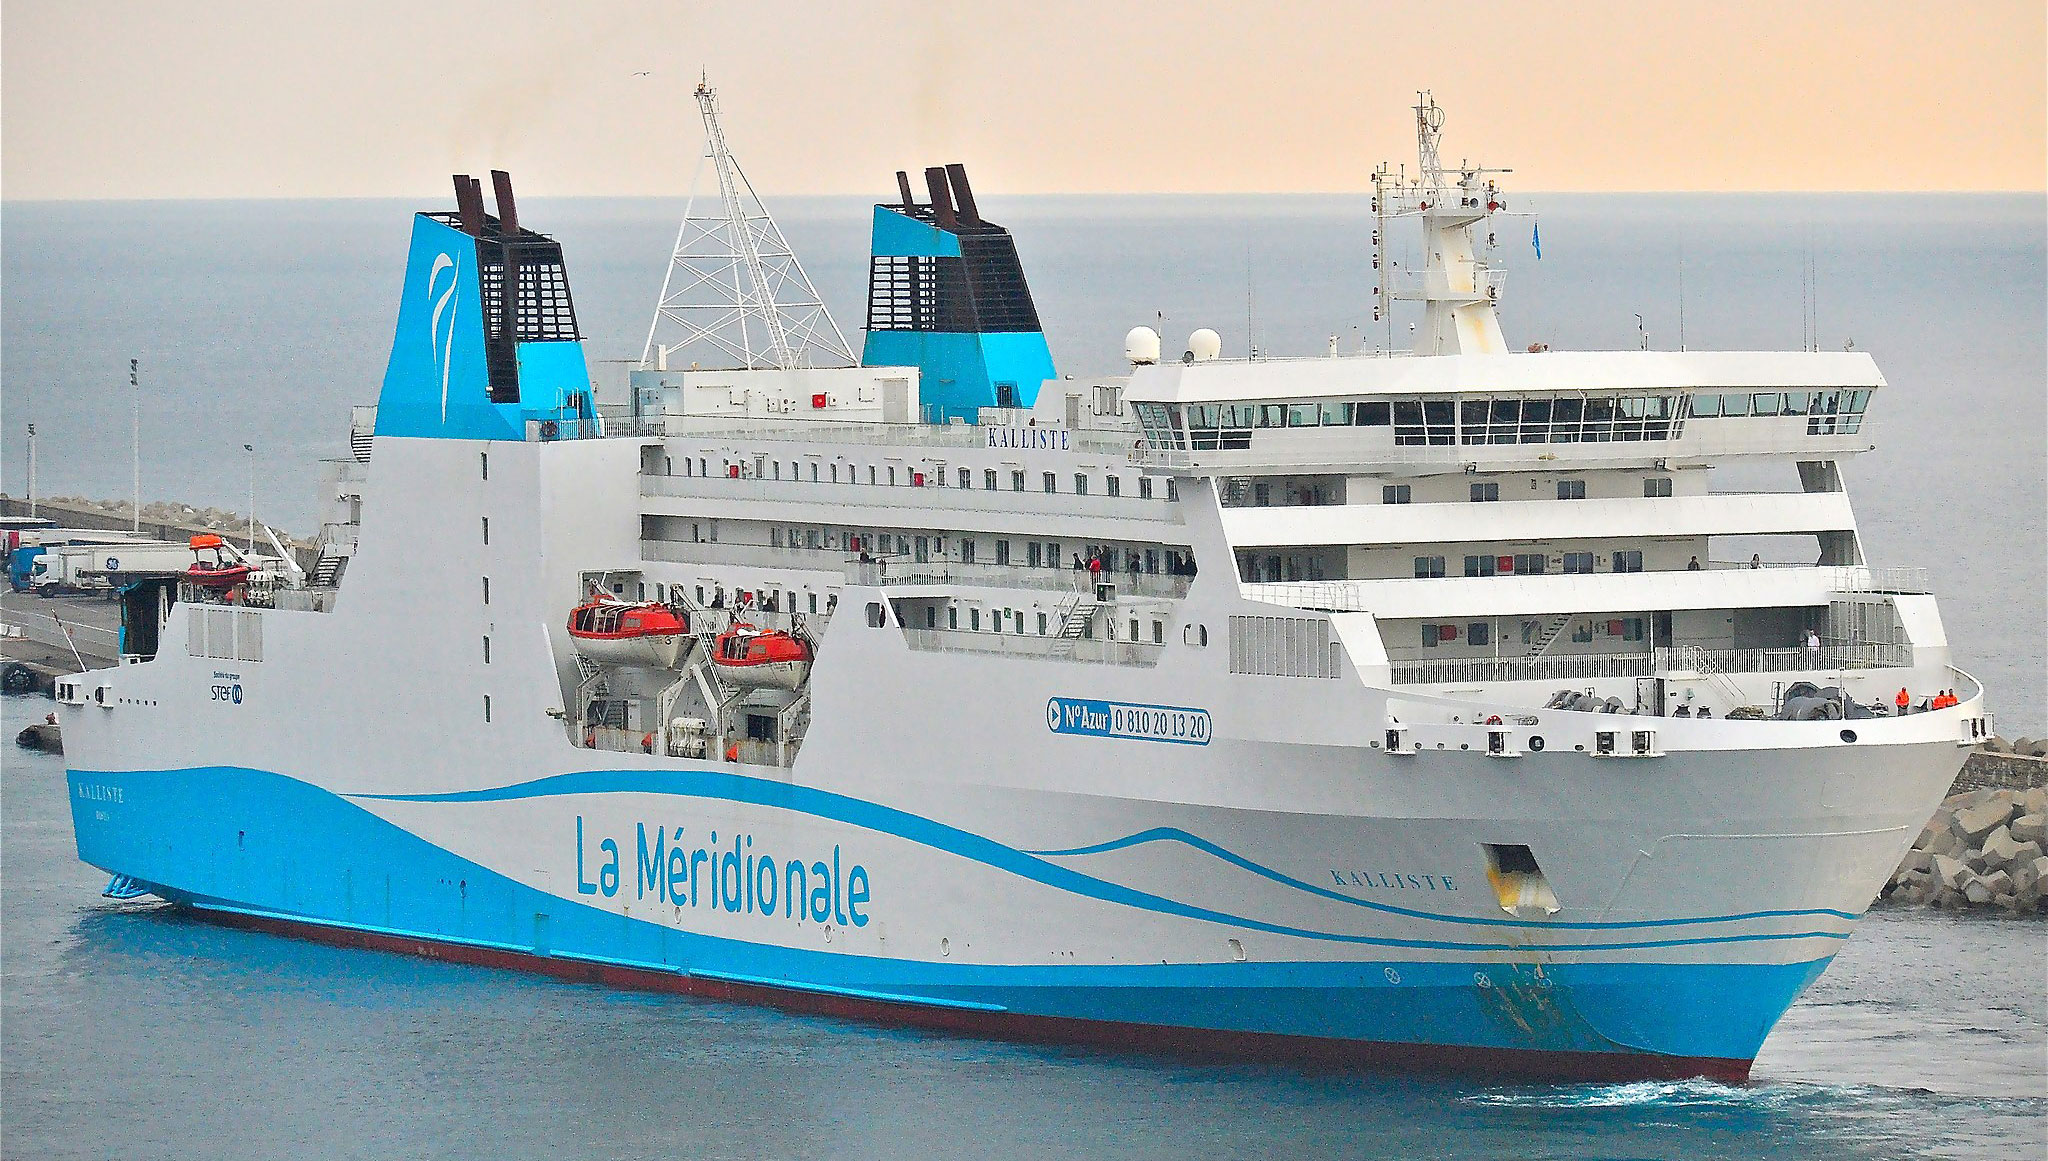 Corsica-French mainland operator awarded €1.7m compensation over ferry strike